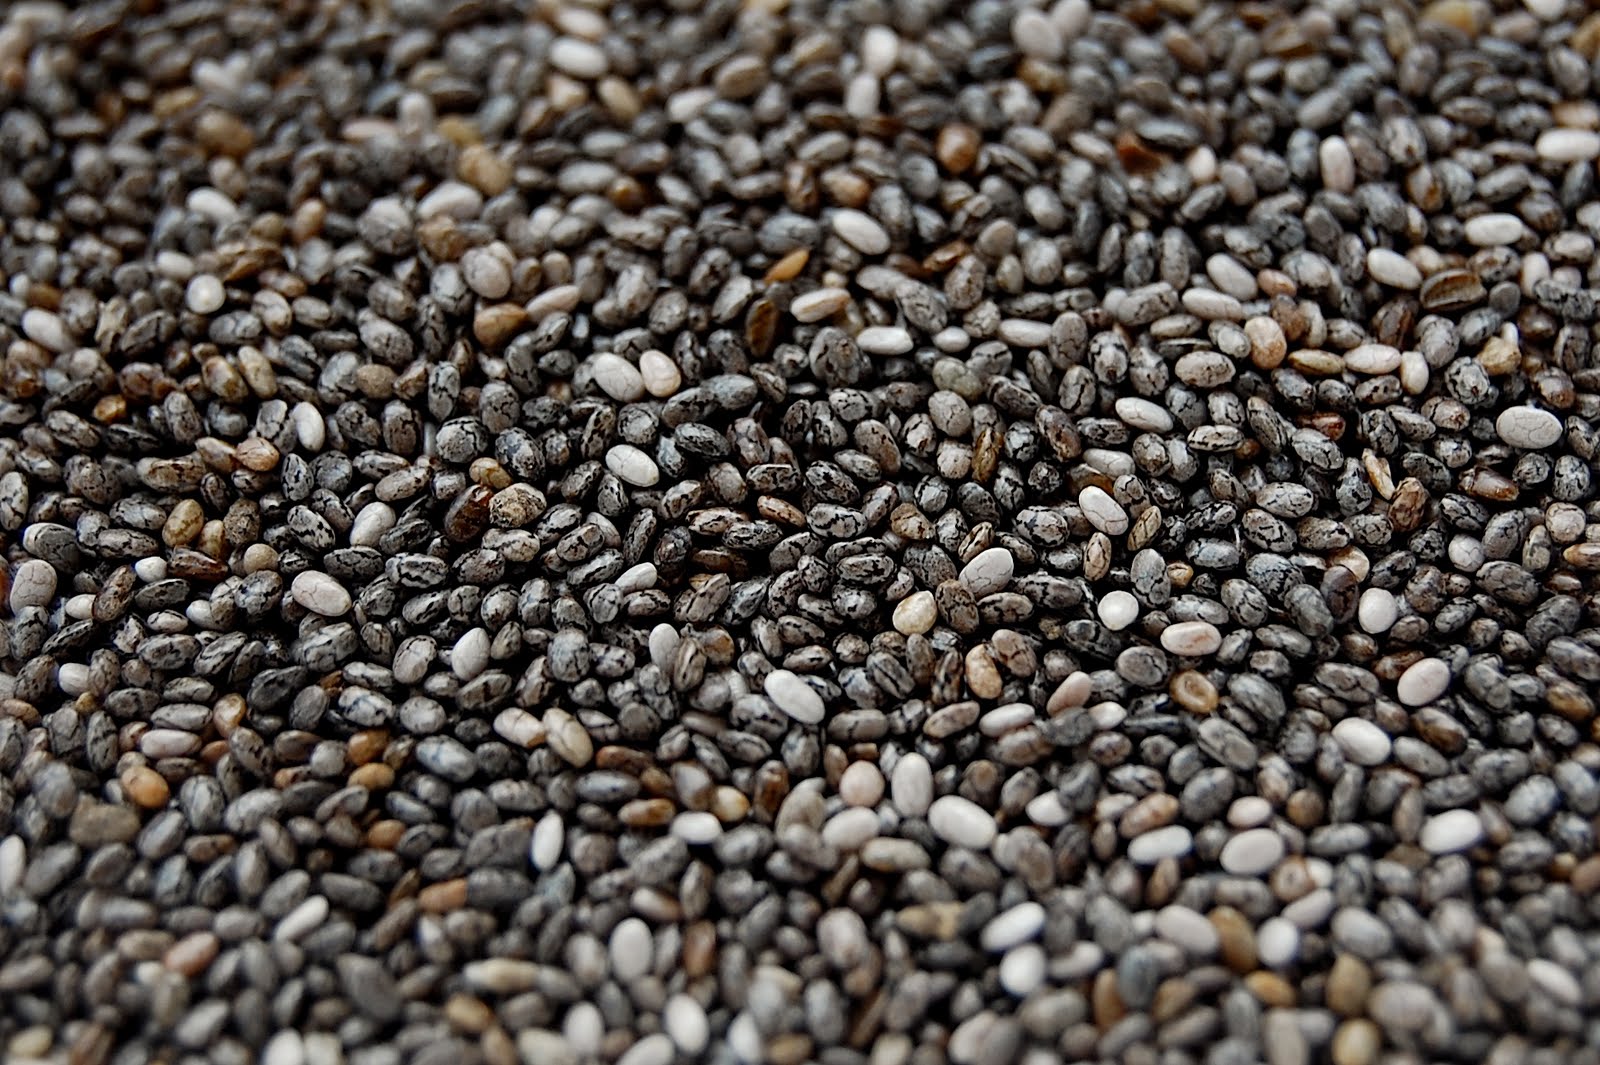 Chia seeds: mouthwatering?